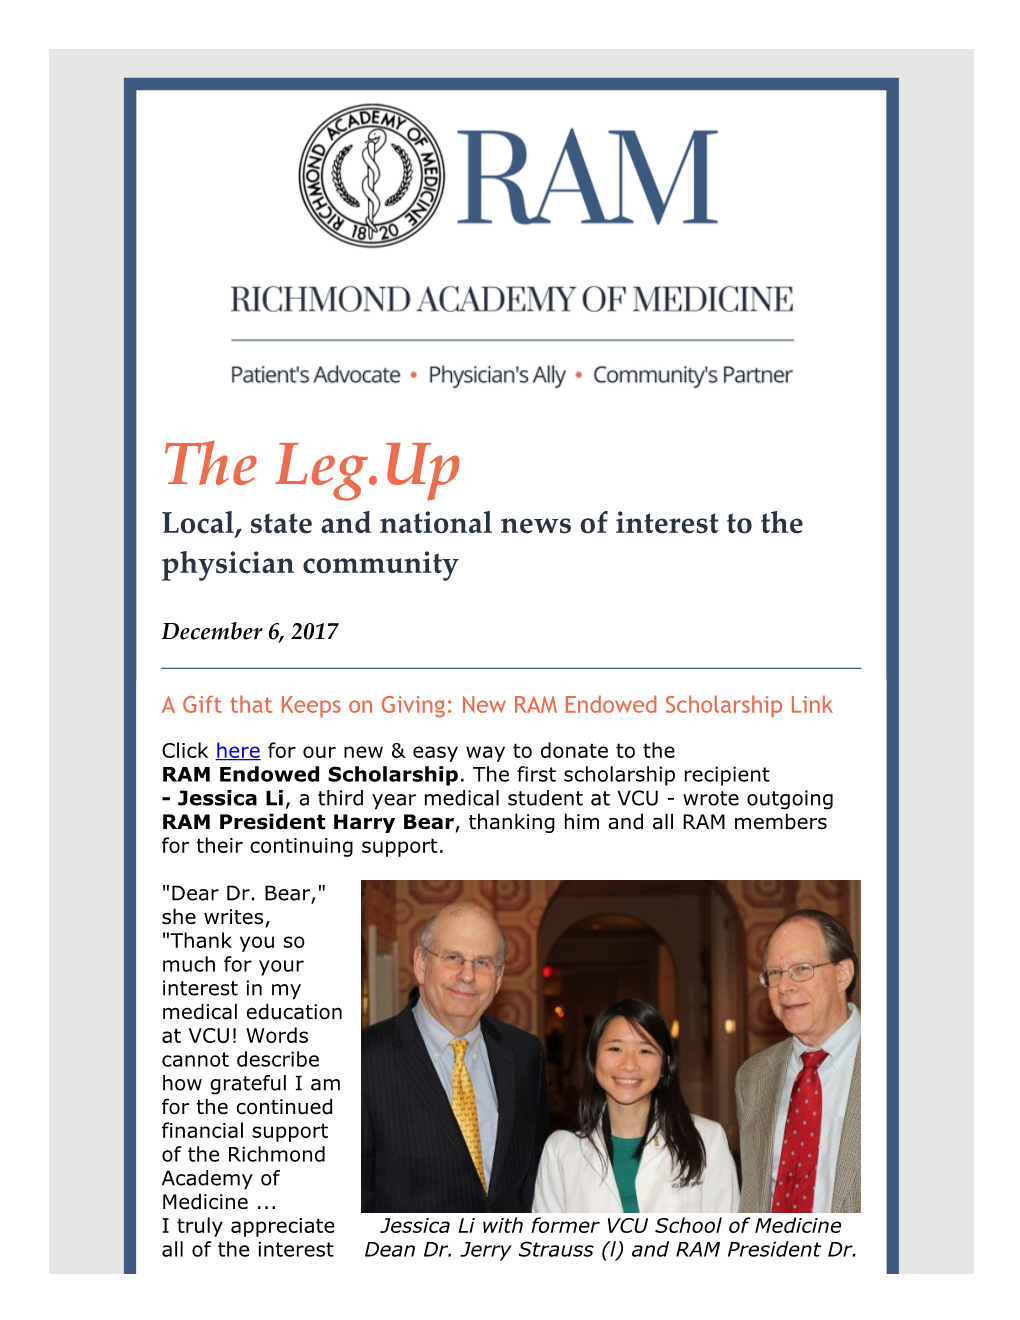 The Leg.Up Local, State and National News of Interest to the Physician Community